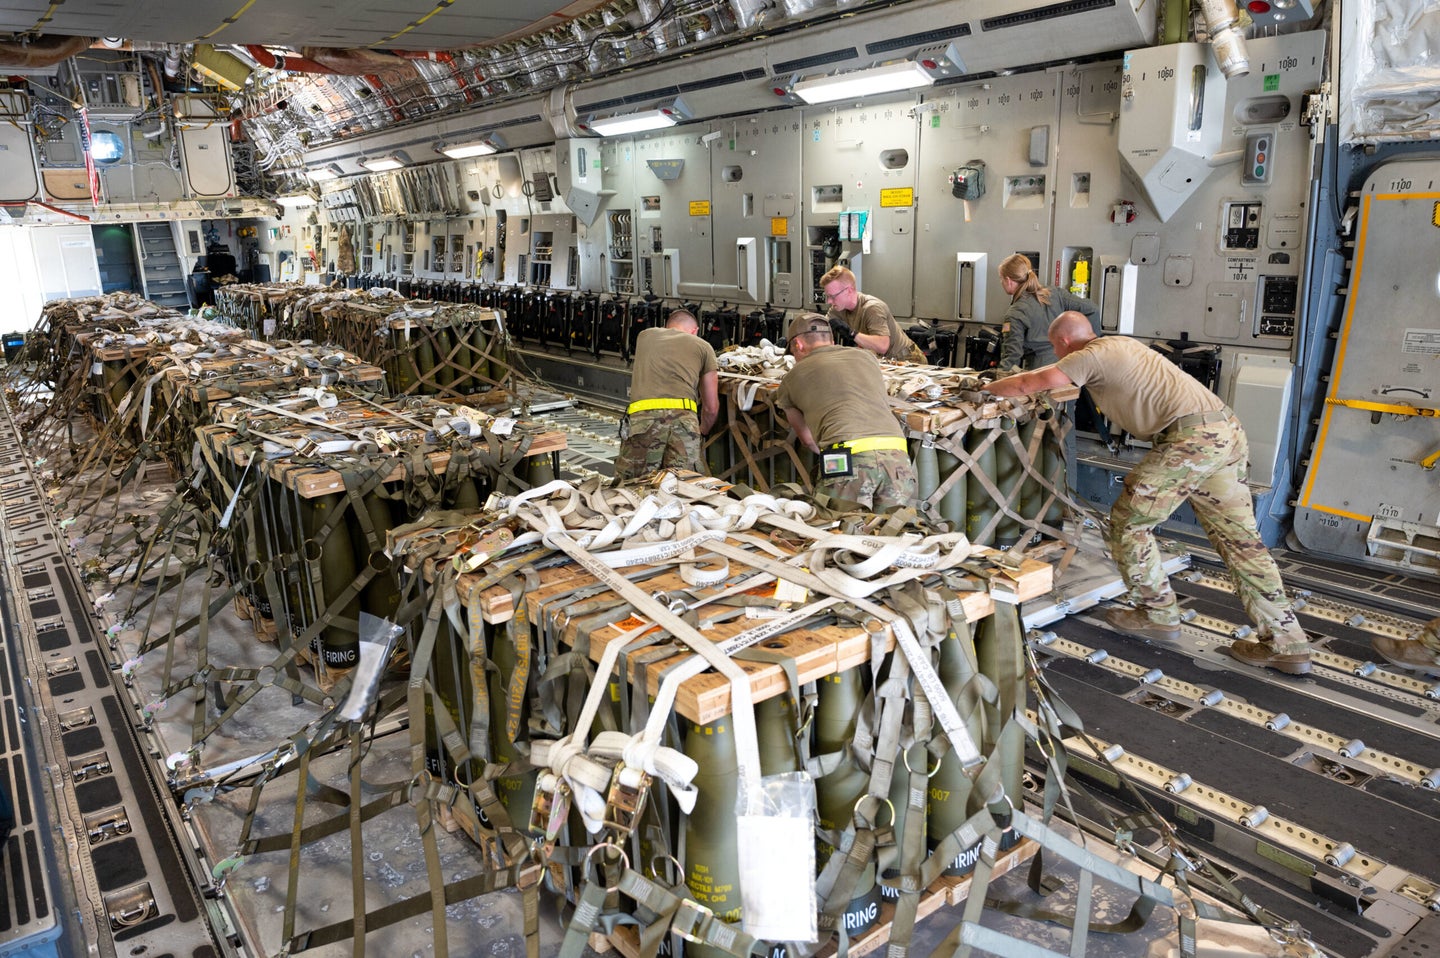 A Department of Defense’s Office of Inspector General report released Thursday found that the Pentagon has not thoroughly monitored the transfer of some of the U.S.’s most advanced weapons and devices sent to Ukraine. (U.S. Air Force photo by Airman 1st Class Cydney Lee)